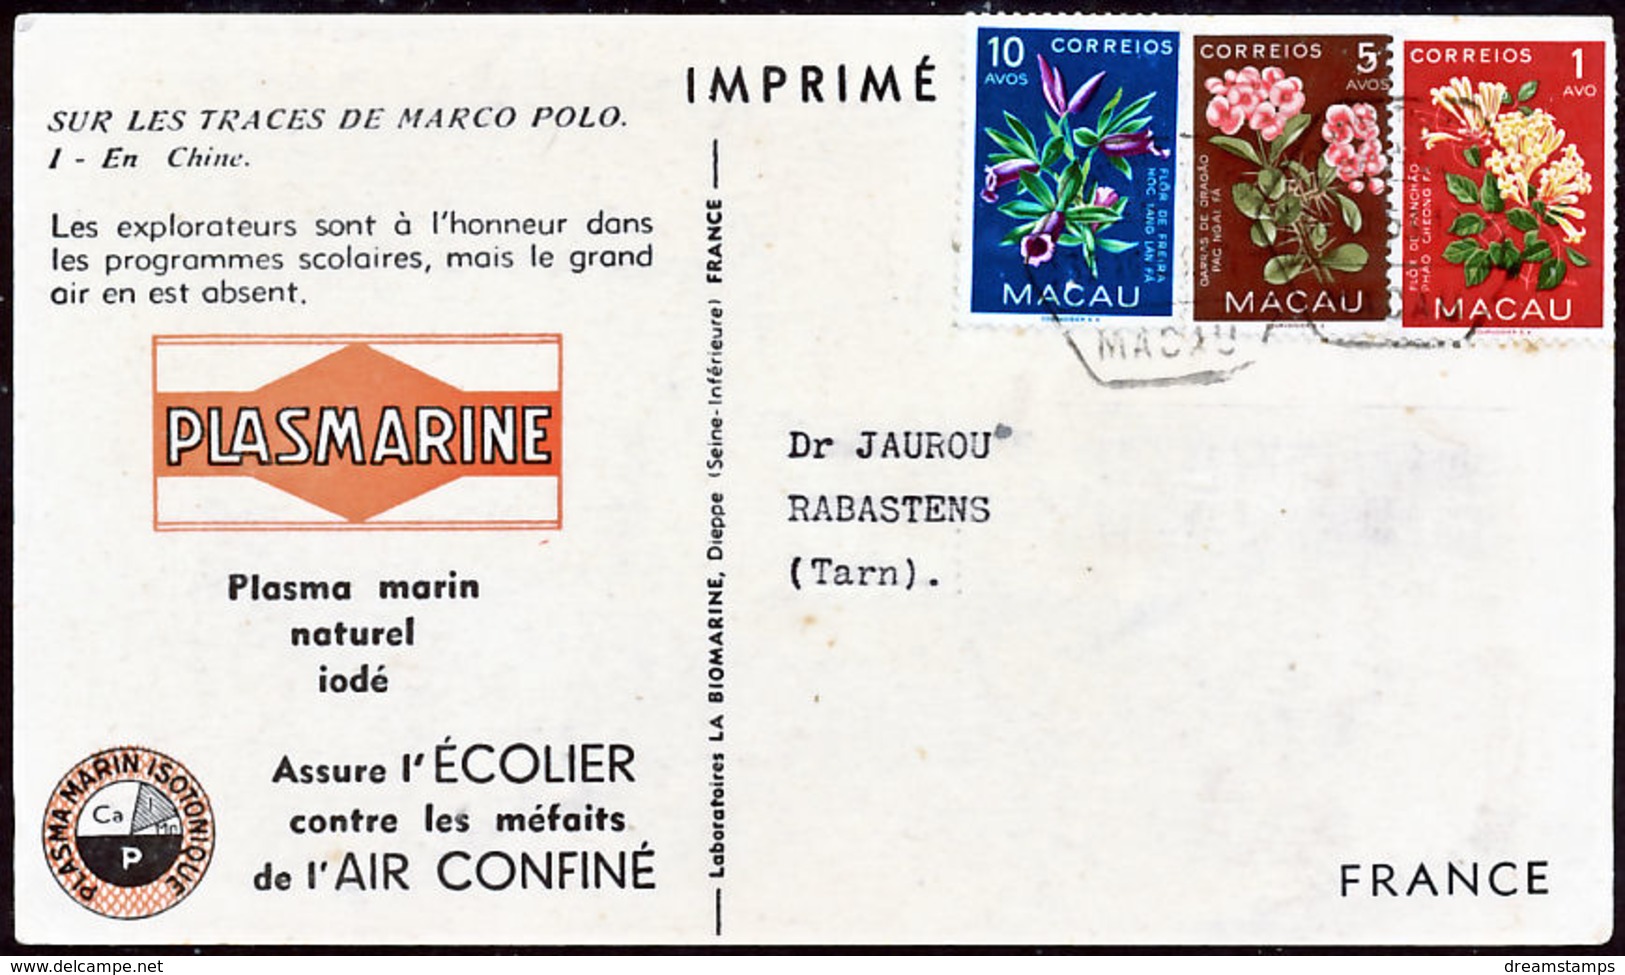 !										■■■■■ds■■ Macao 1953 Advertising Cover Rate 16 Avos To France Marco Polo Anf The Grand Khan (CO372) - Cartas & Documentos